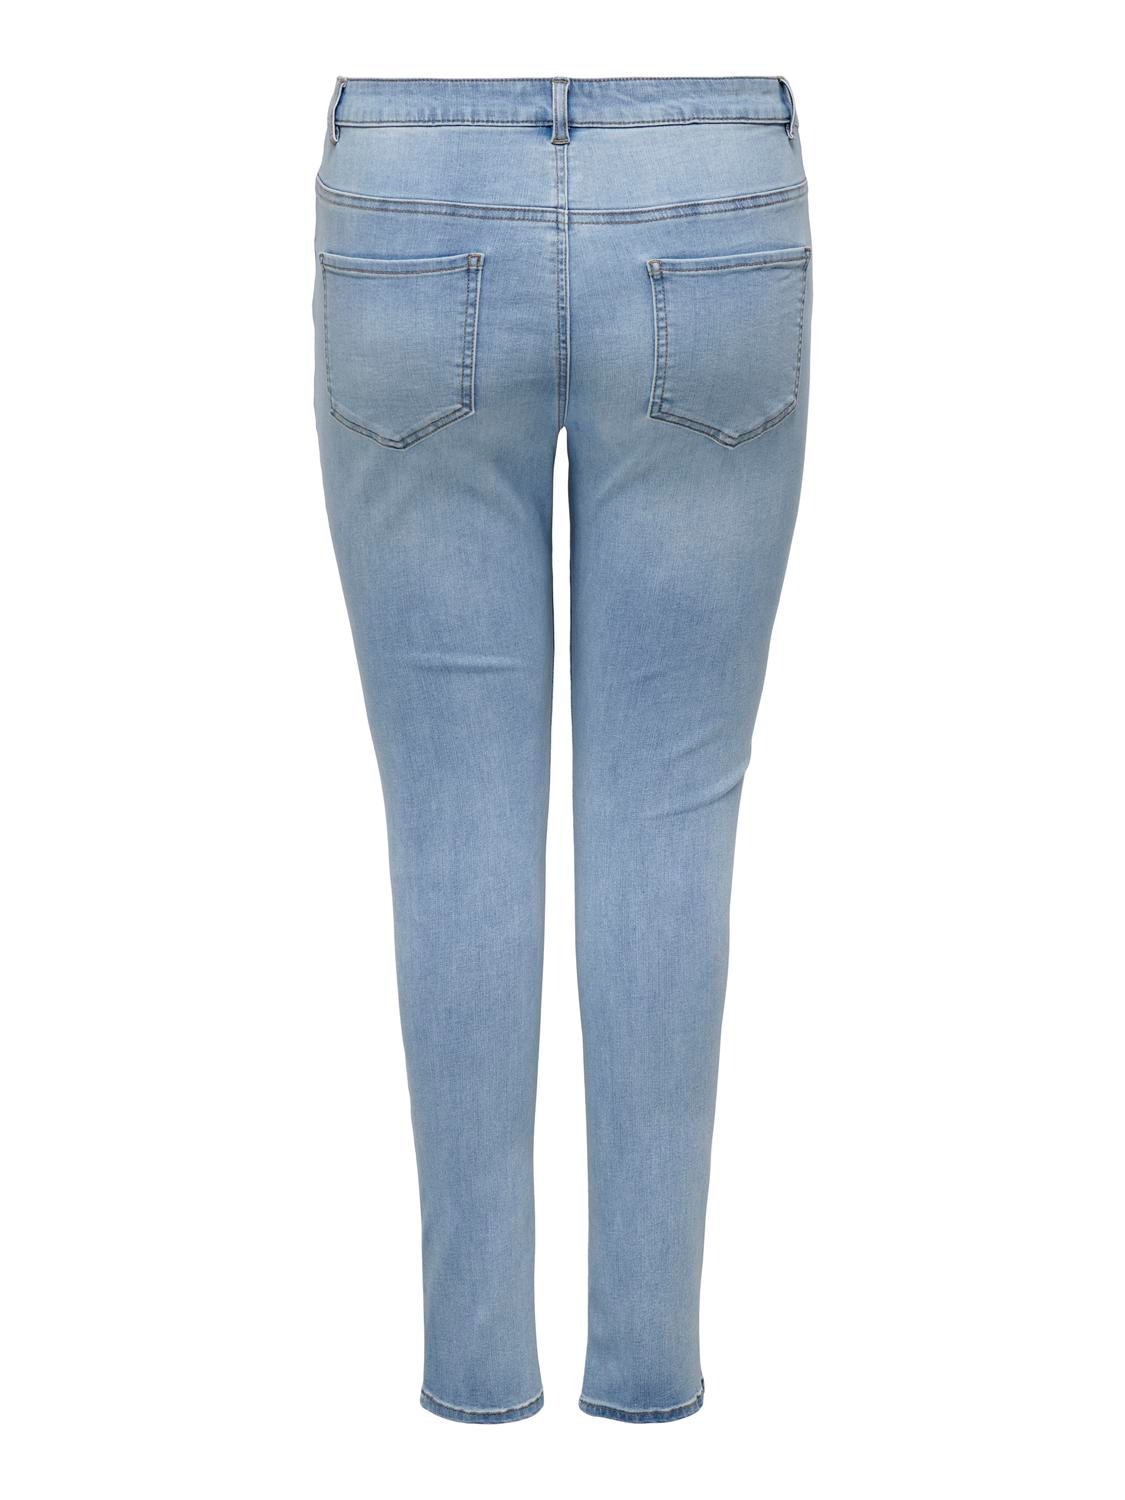 ONLY Skinny Fit Hohe Taille Jeans -Light Blue Denim - 15308803